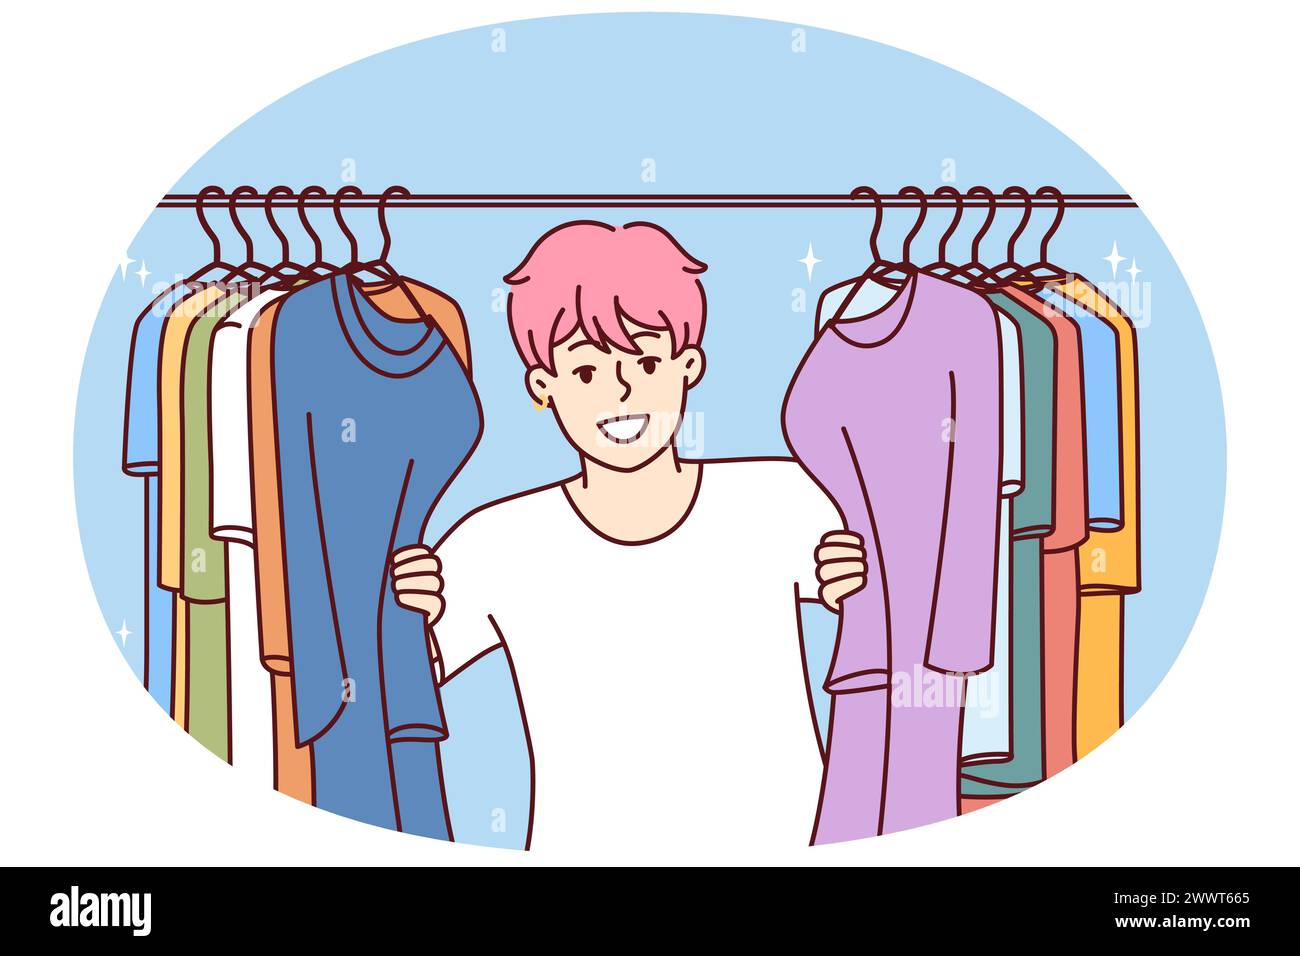 Young Cheerful man in t-shirt smiling peeking out from behind hanger for collection of clothes choosing new look. Guy with pink hair is standing in clothing store wanting to buy fashionable outfit Stock Vector